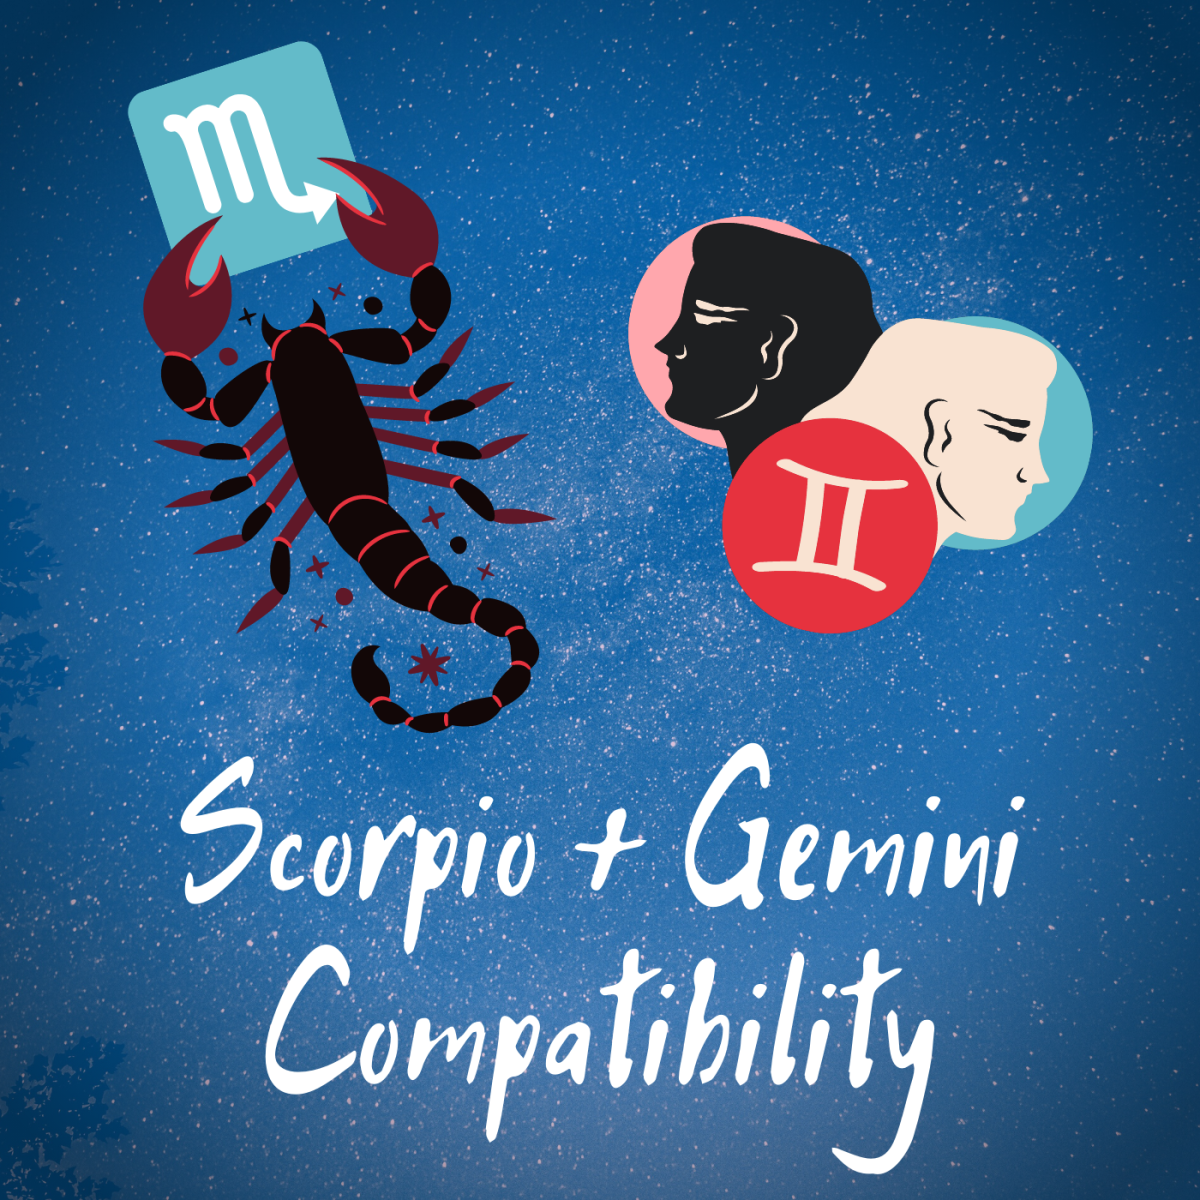 Why Are Gemini and Scorpio Attracted to Each Other?